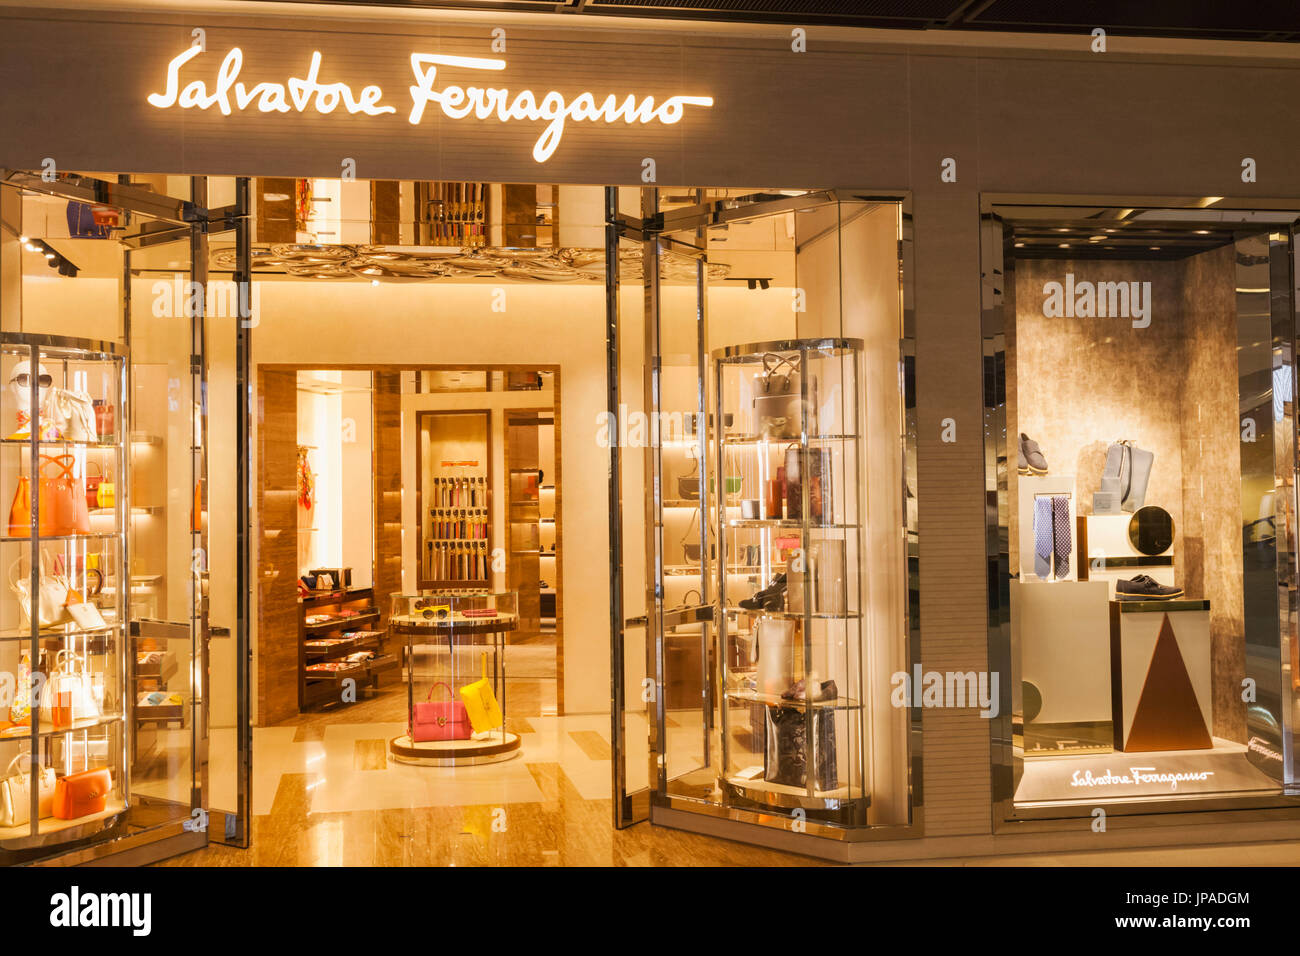 Ferragamo Store High Resolution Stock Photography and Images - Alamy